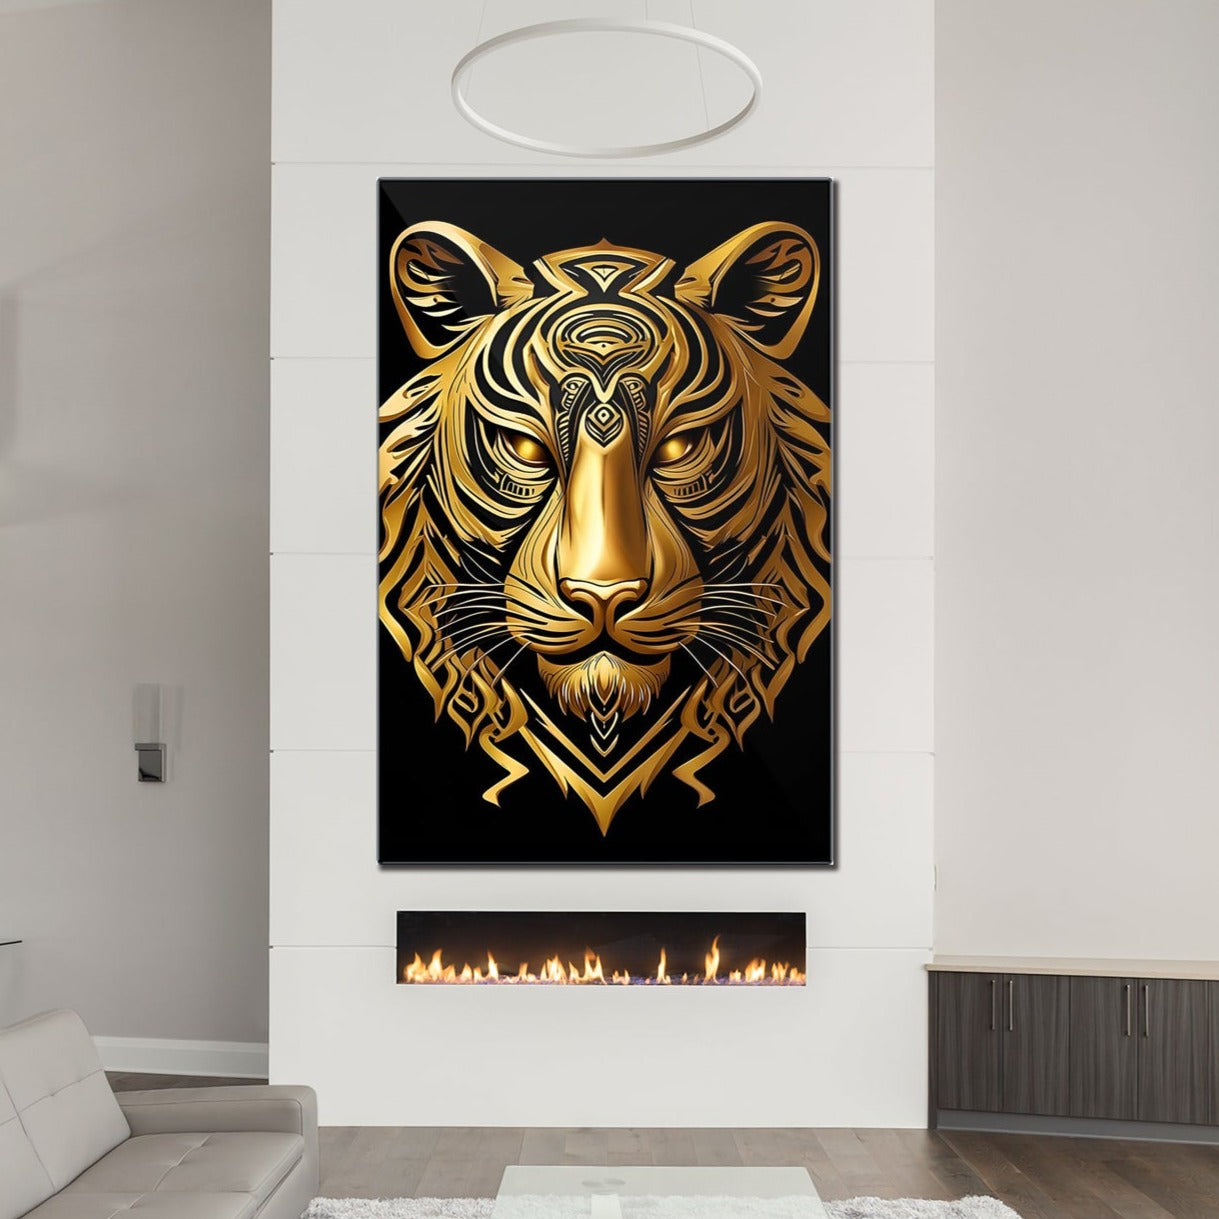 Gold Tribal Tiger Head Printed on Eco-Friendly Recycled Aluminum hung above fireplace